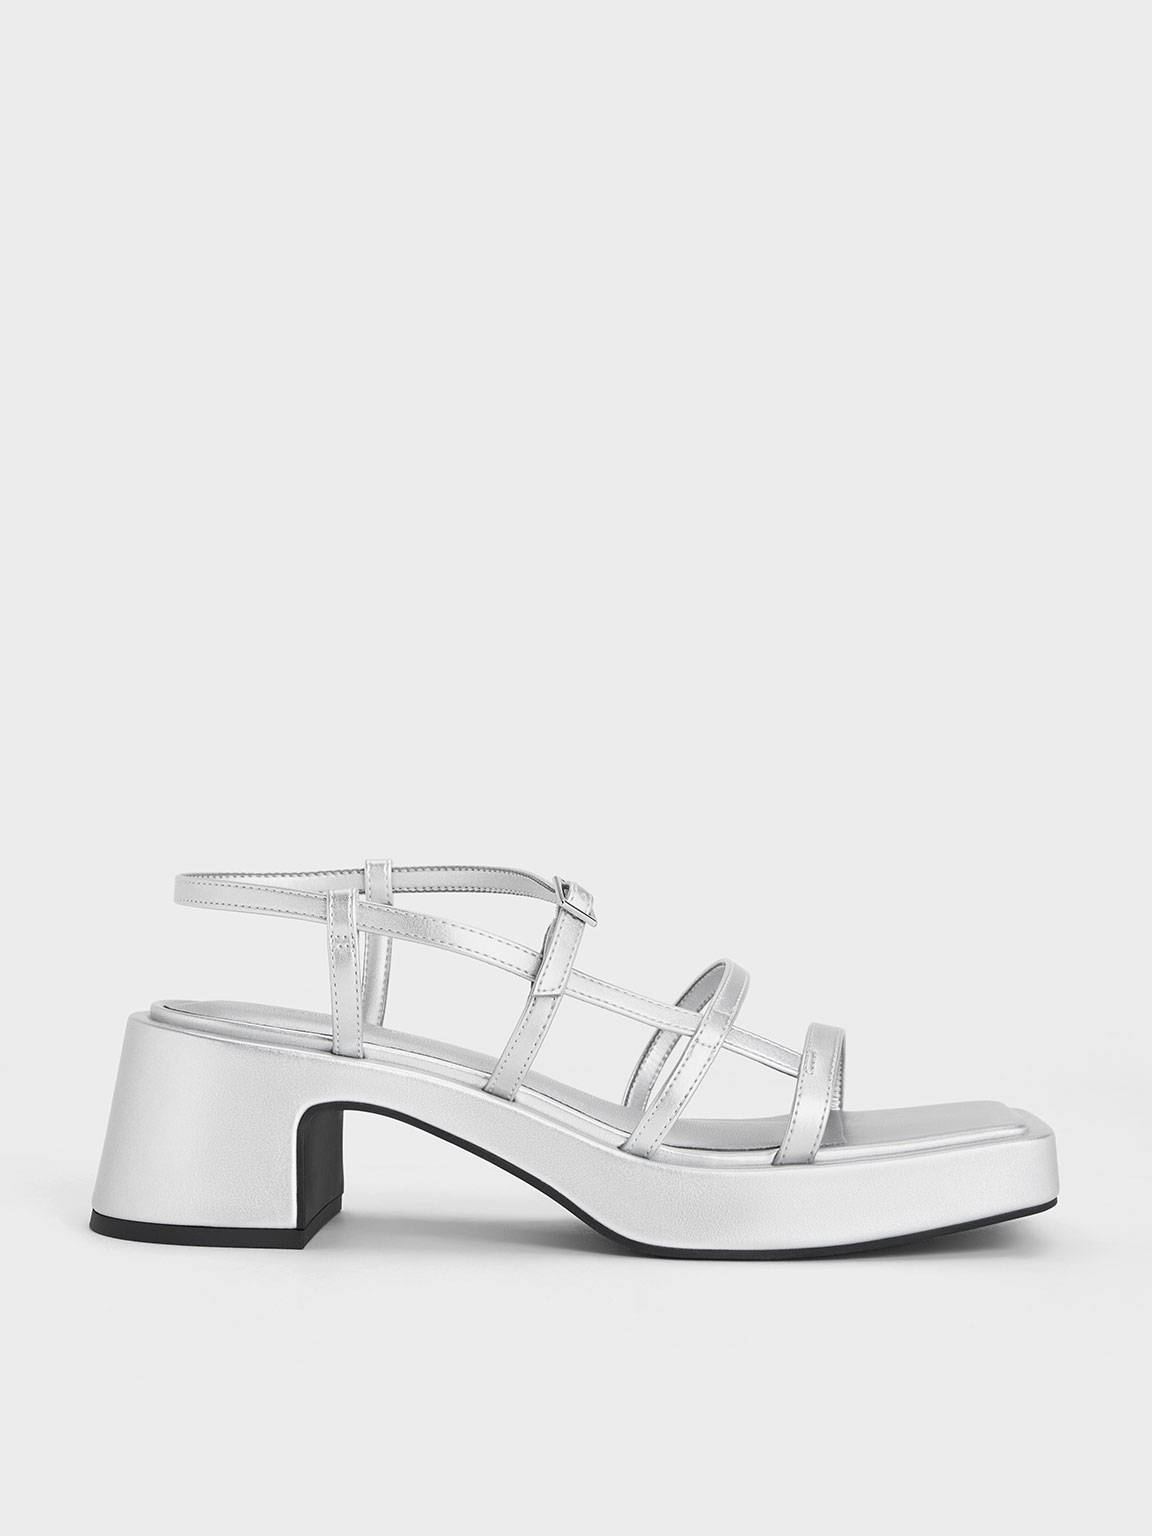 Charles & Keith Selene Strappy Sandals In Silver